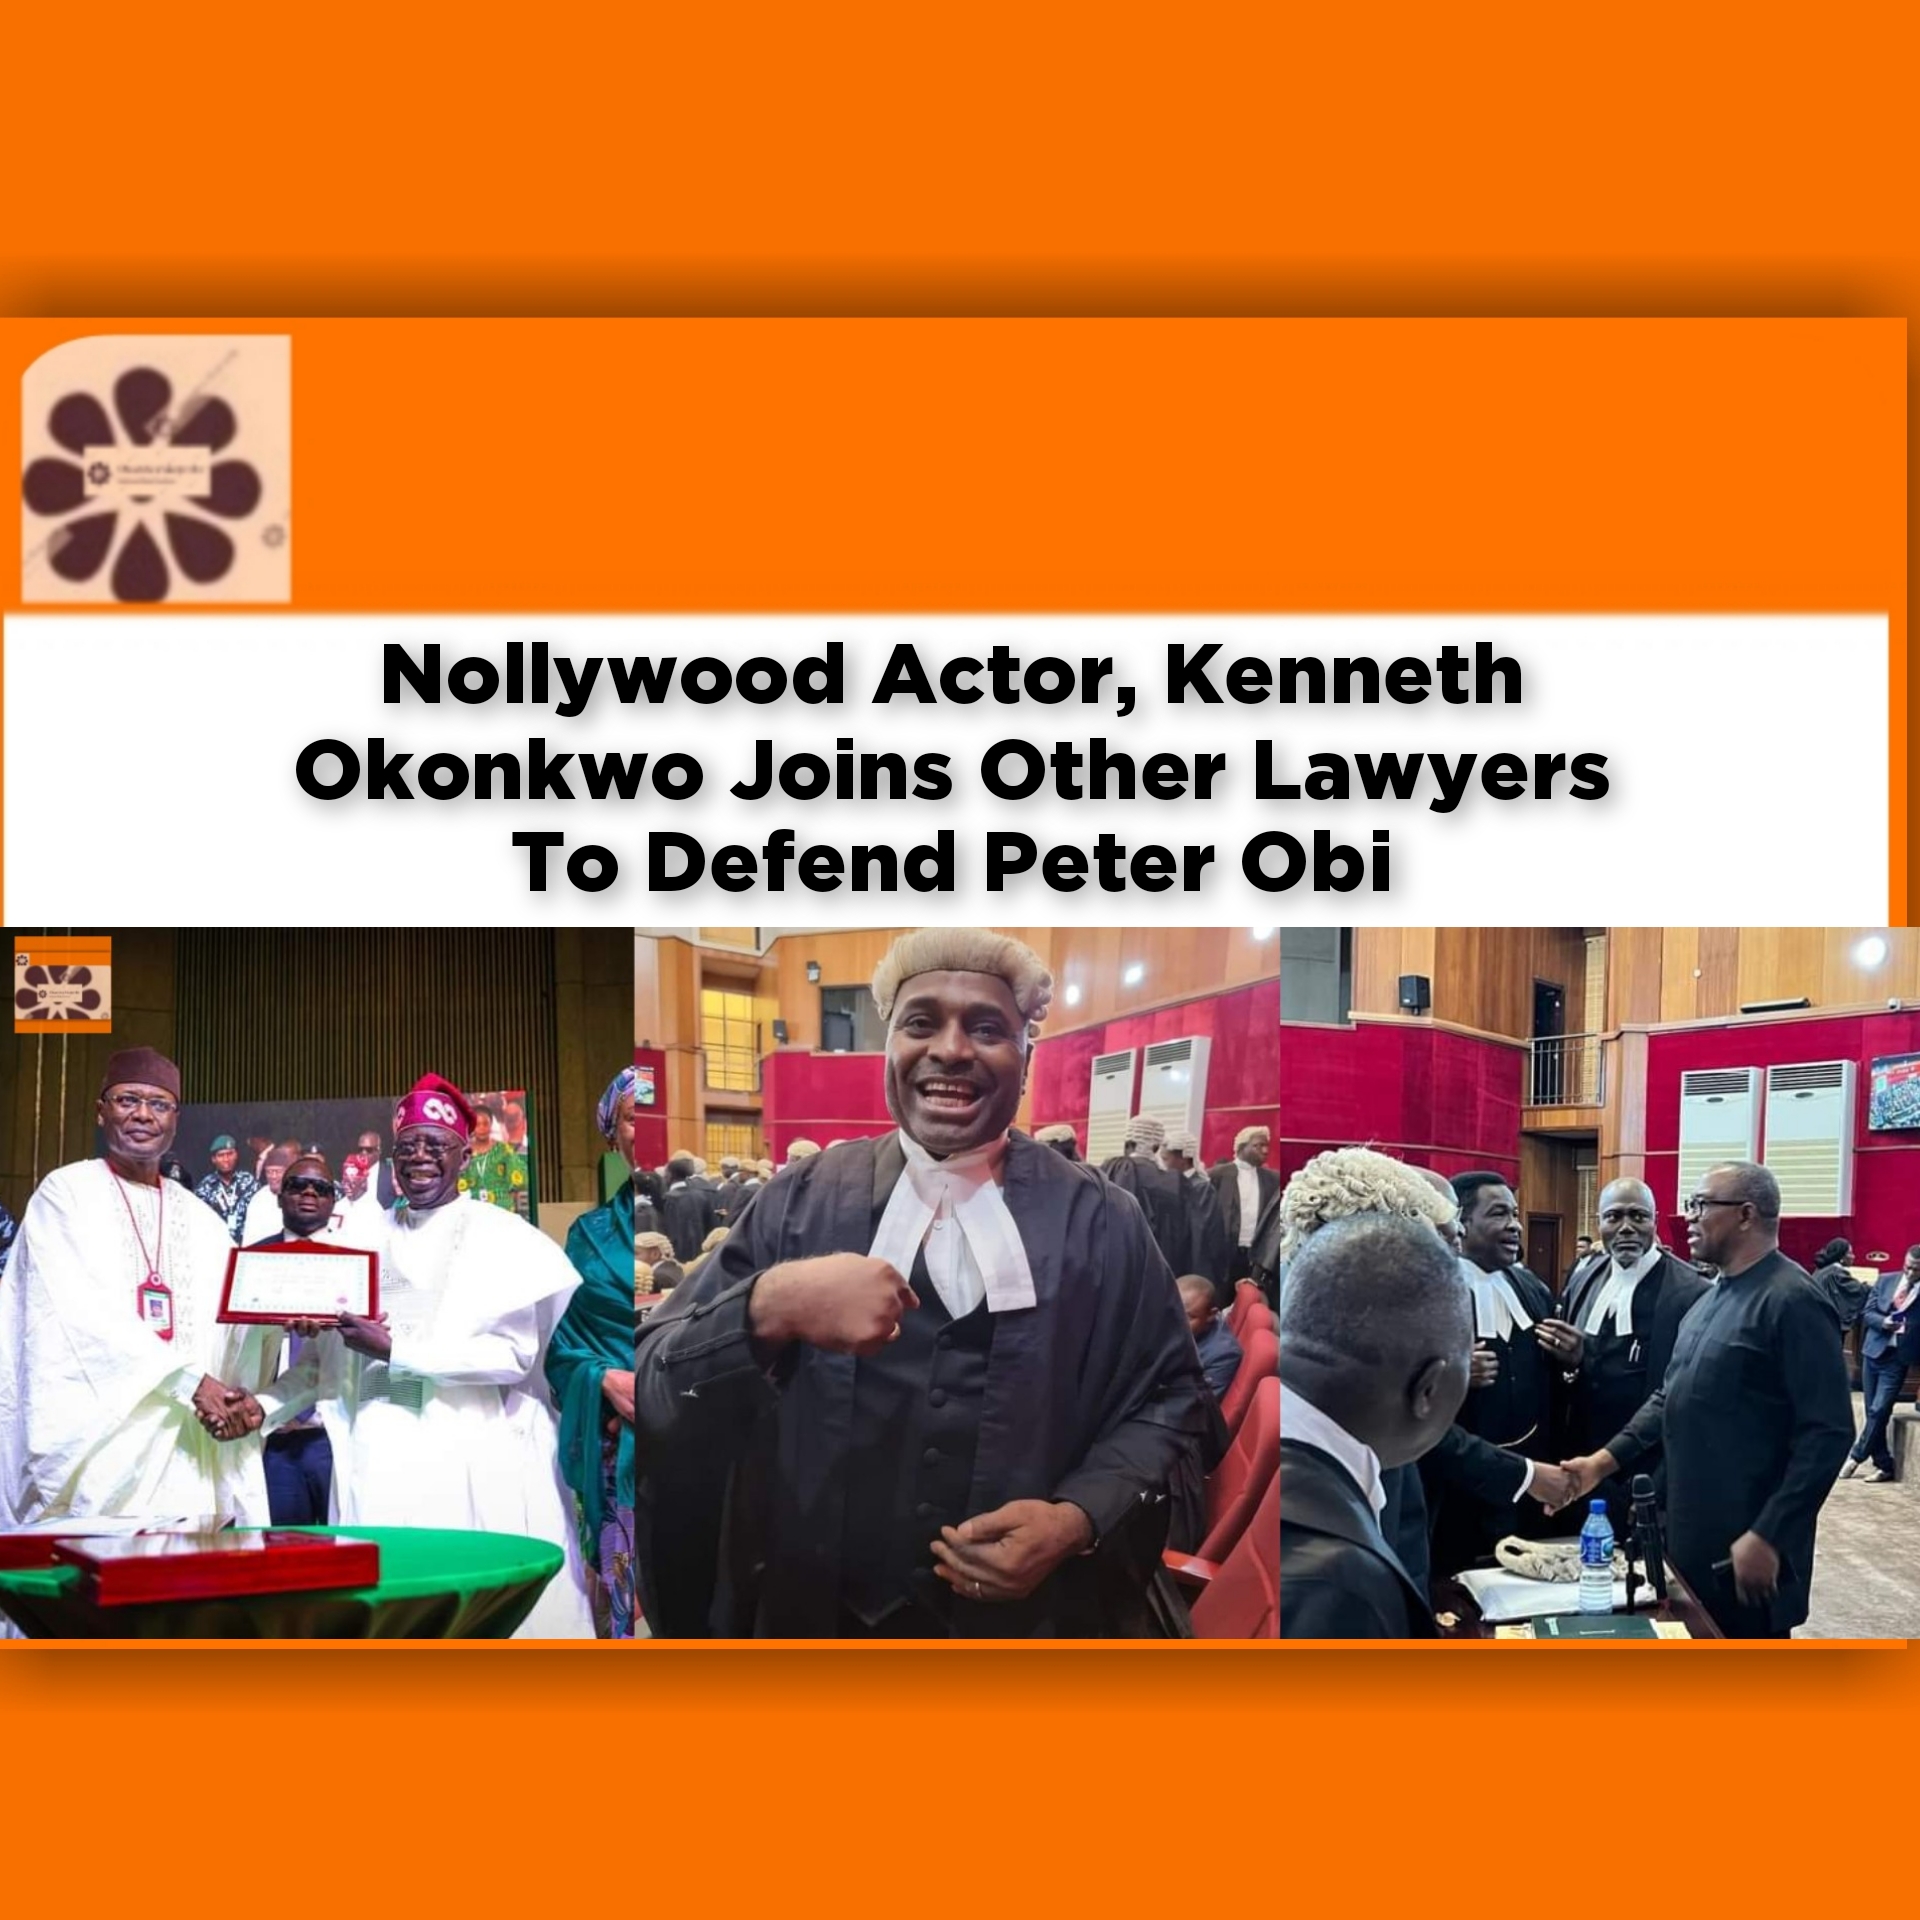 Nollywood Actor, Kenneth Okonkwo Joins Other Lawyers To Defend Peter Obi